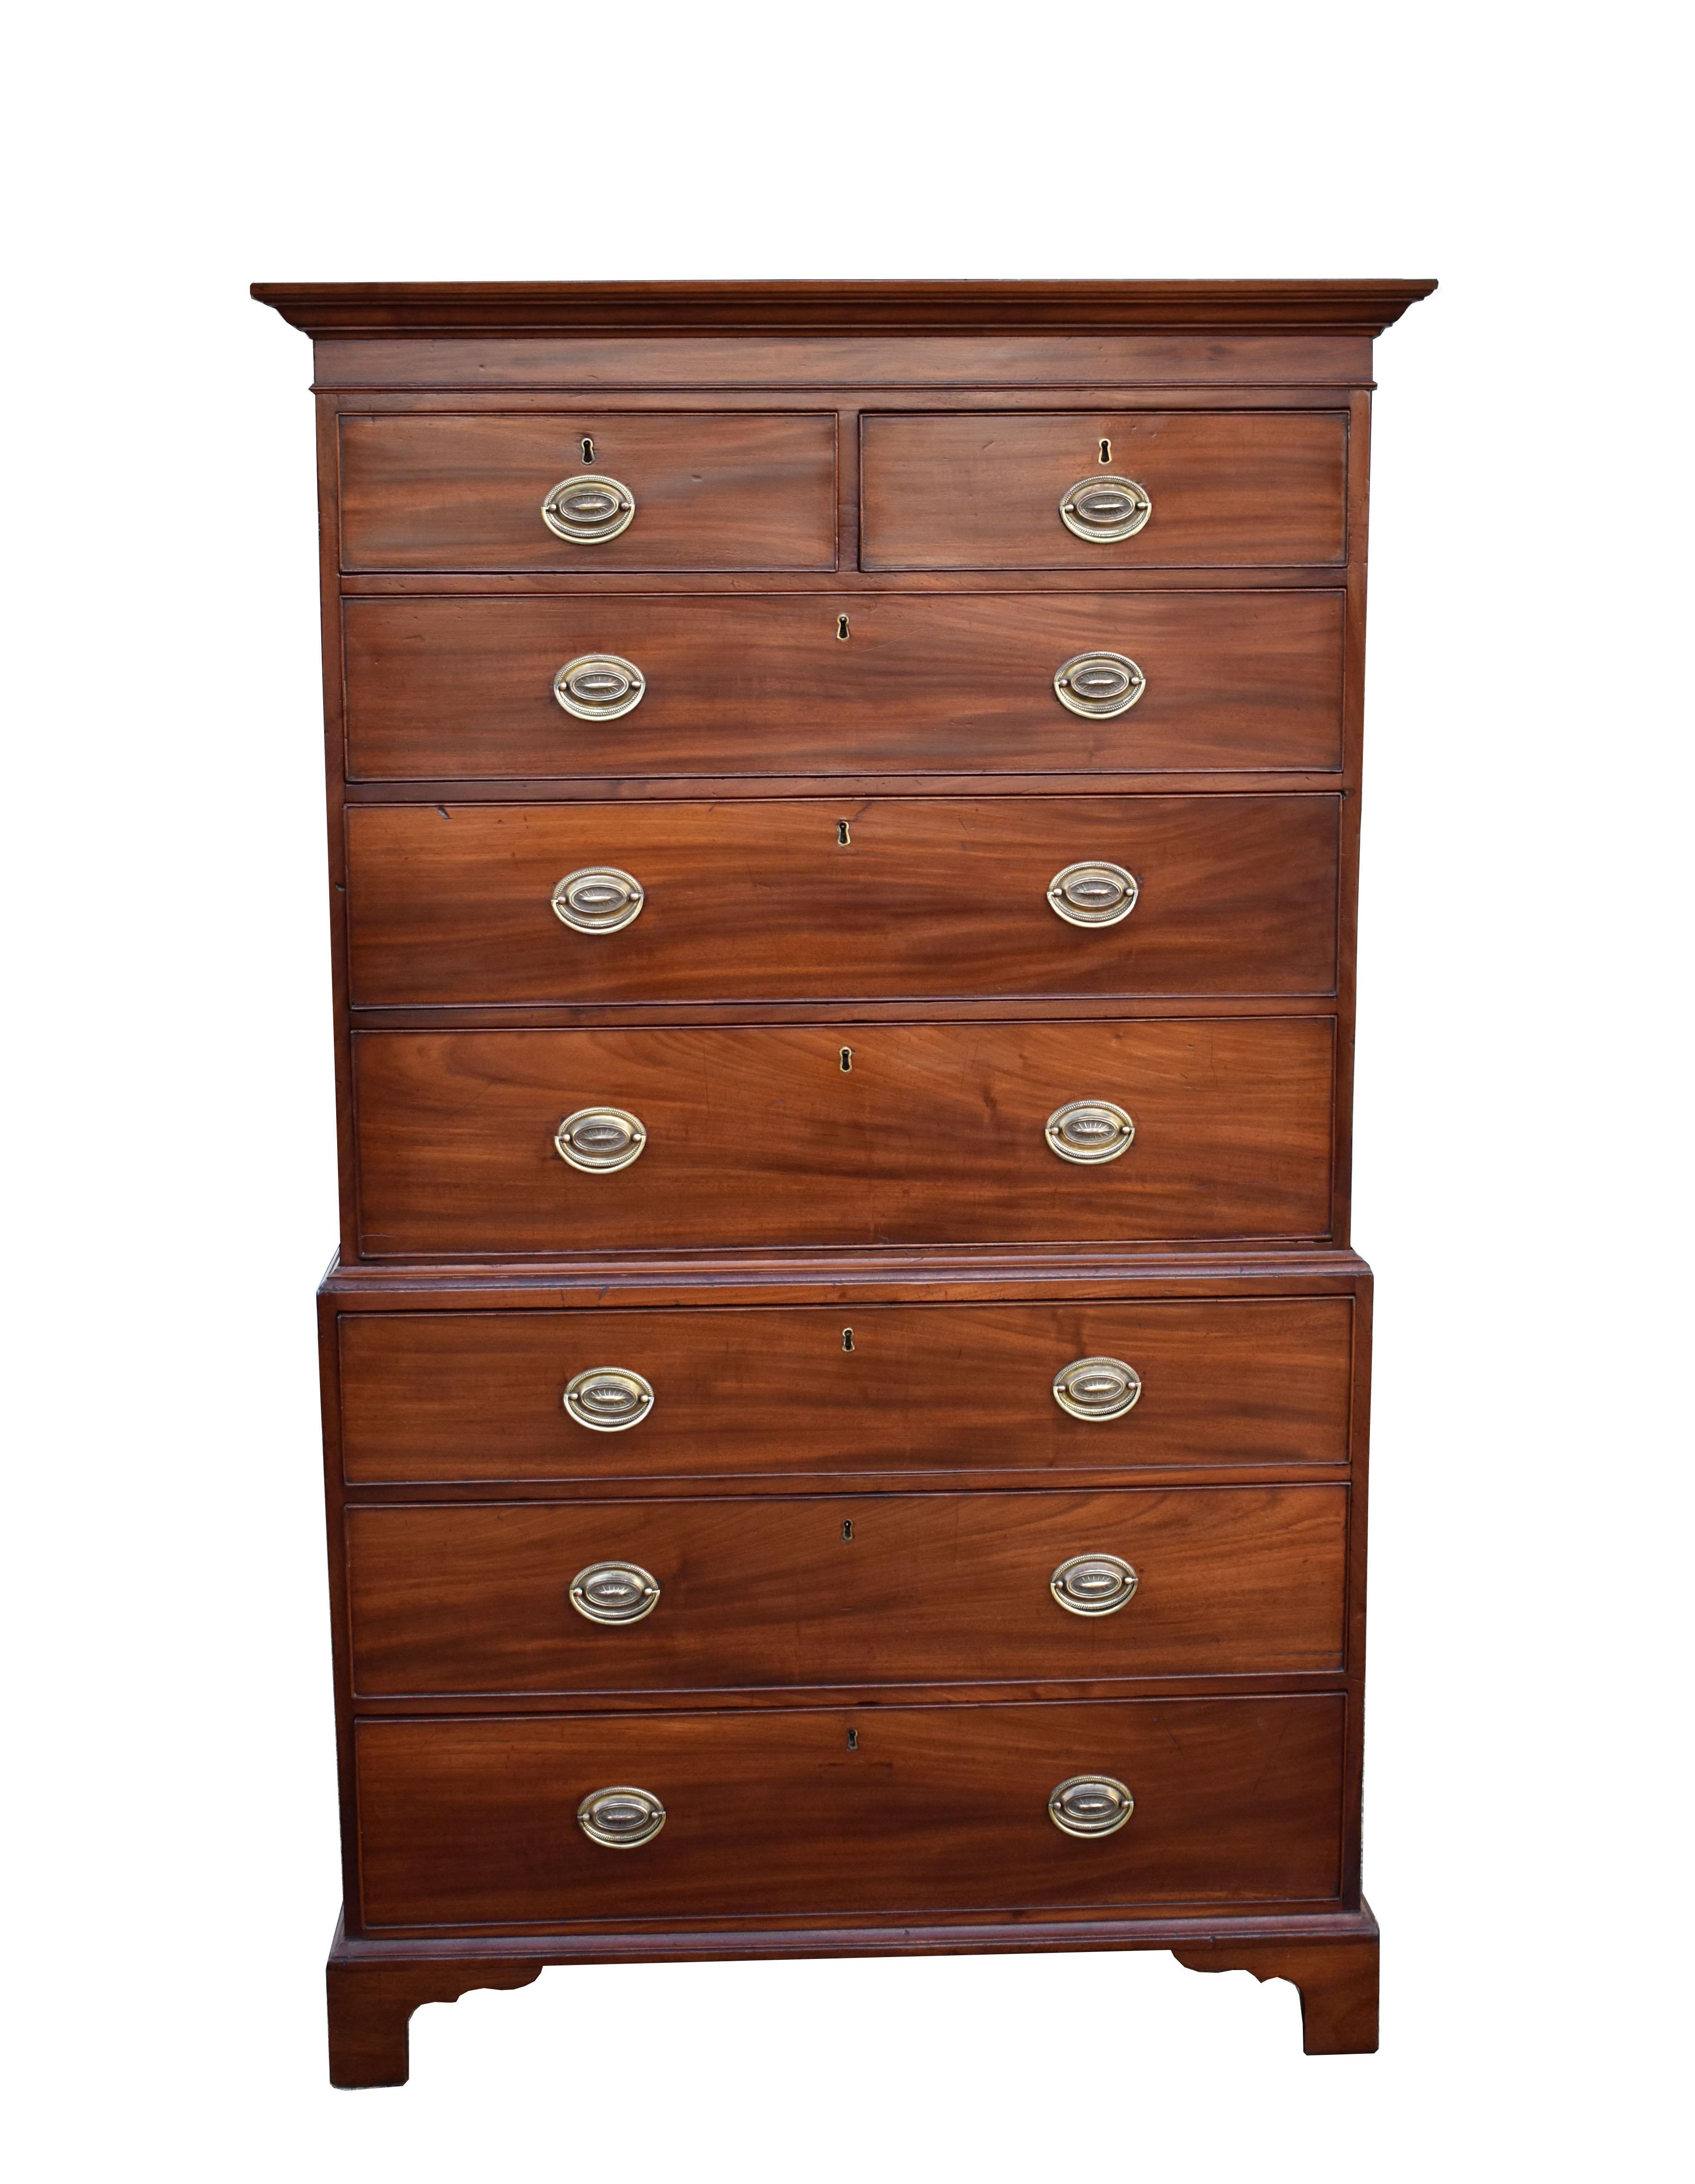 For sale is a good quality George III mahogany chest on chest, having an arrangement of 8 drawers, each with brass handles and escutcheons. The chest is raised on bracket feet and is in good condition for its age. 

Measures: Width 43